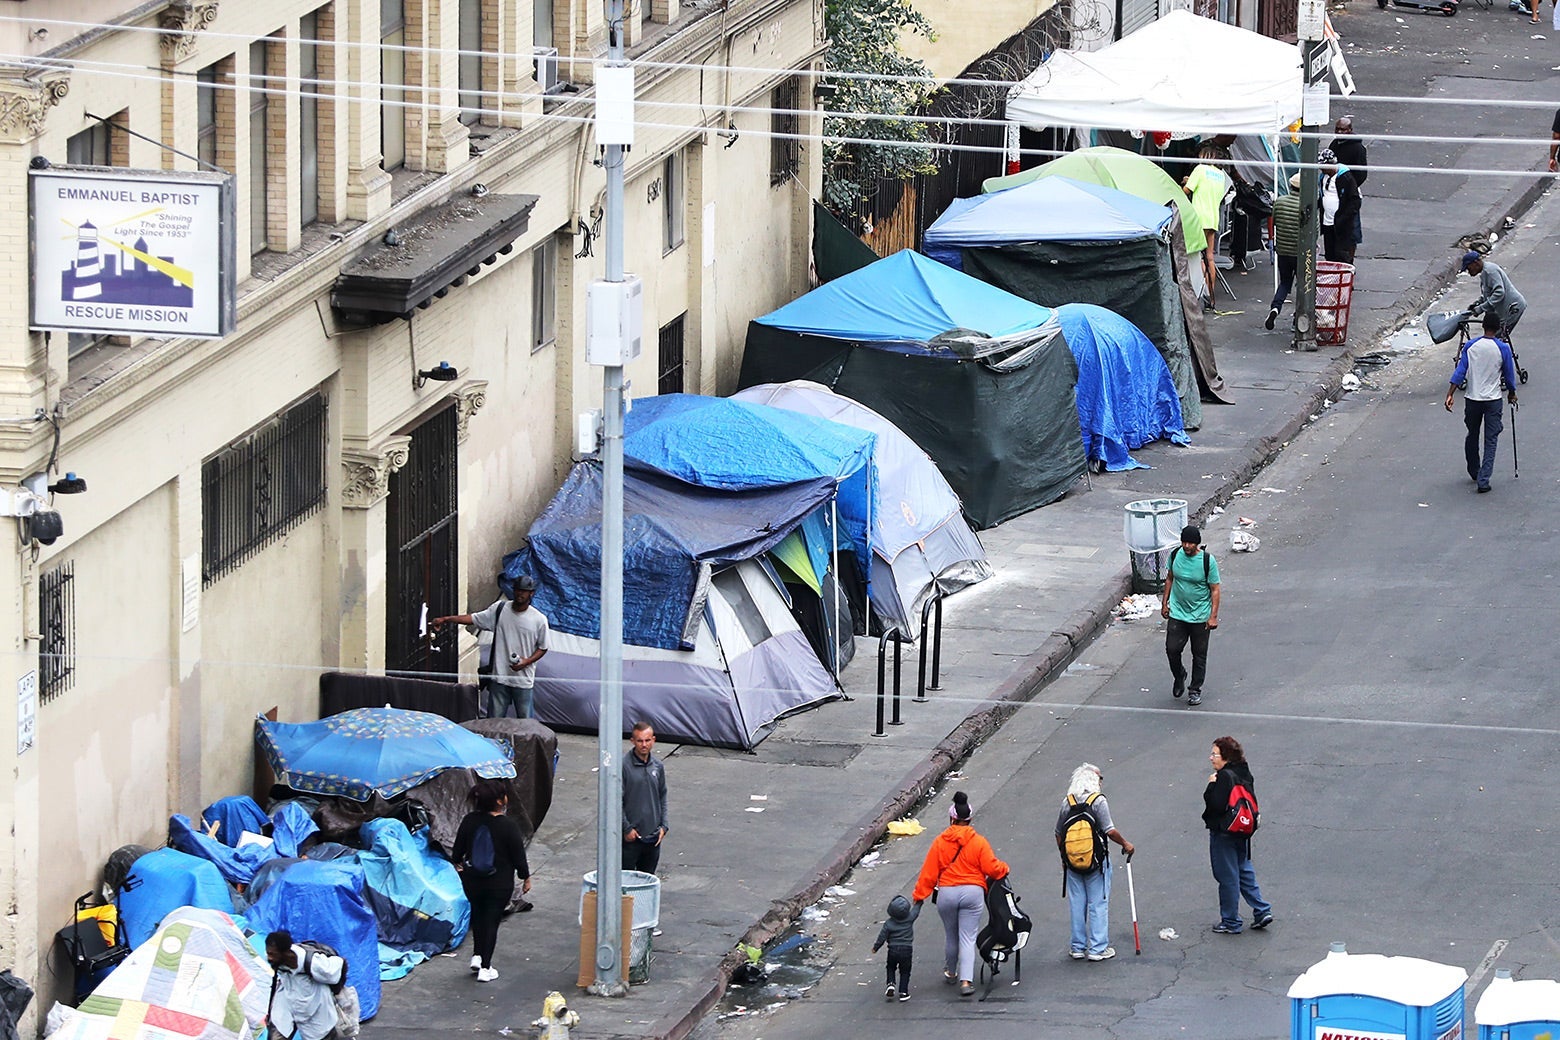 People walk next to a row of tents on Skid Row.